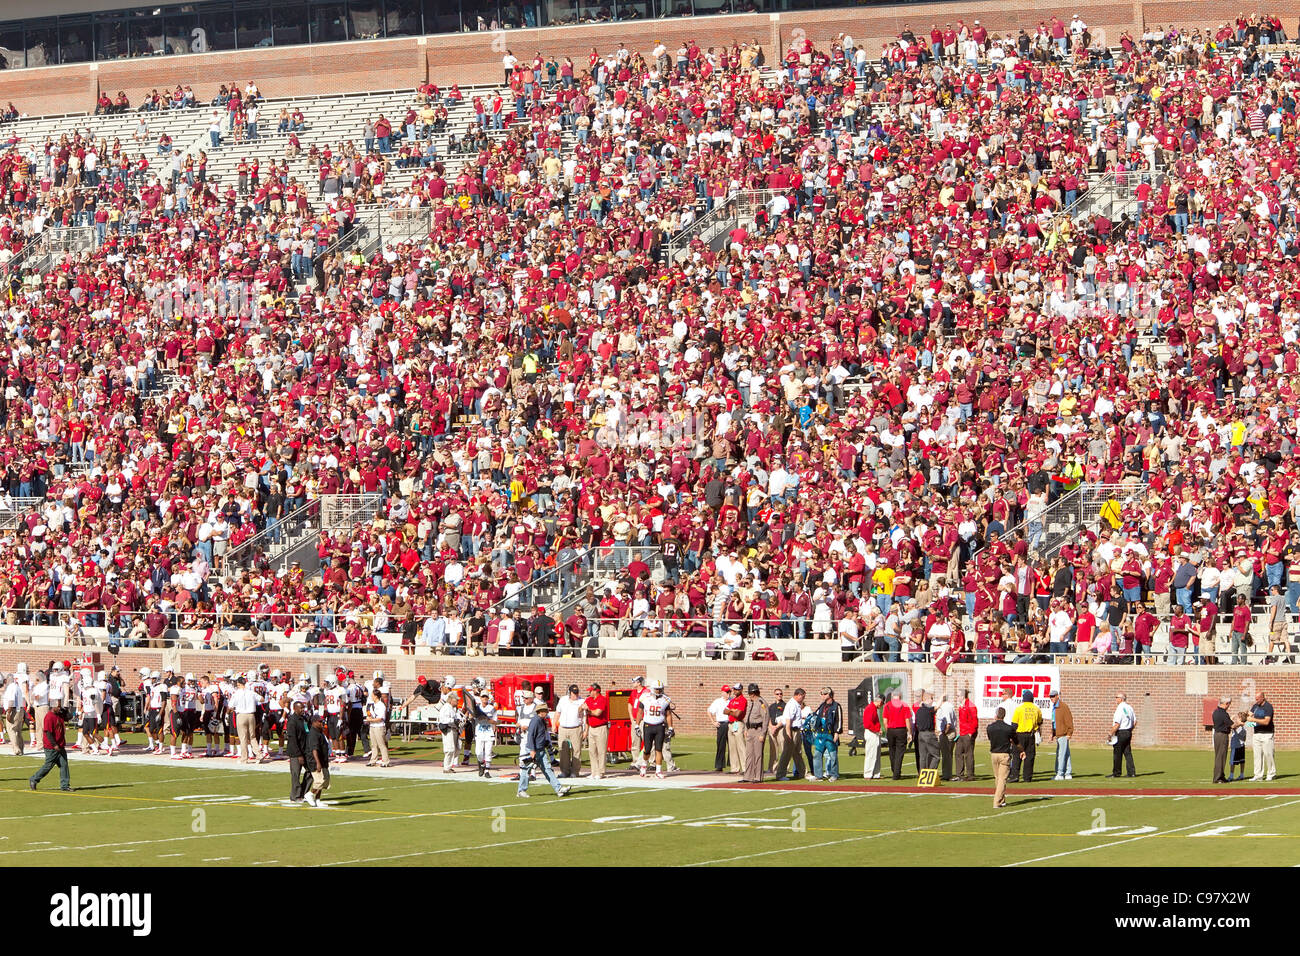 Seminole fans fill the stands at a FSU home football game in Tallahassee, Florida, USA. Stock Photo